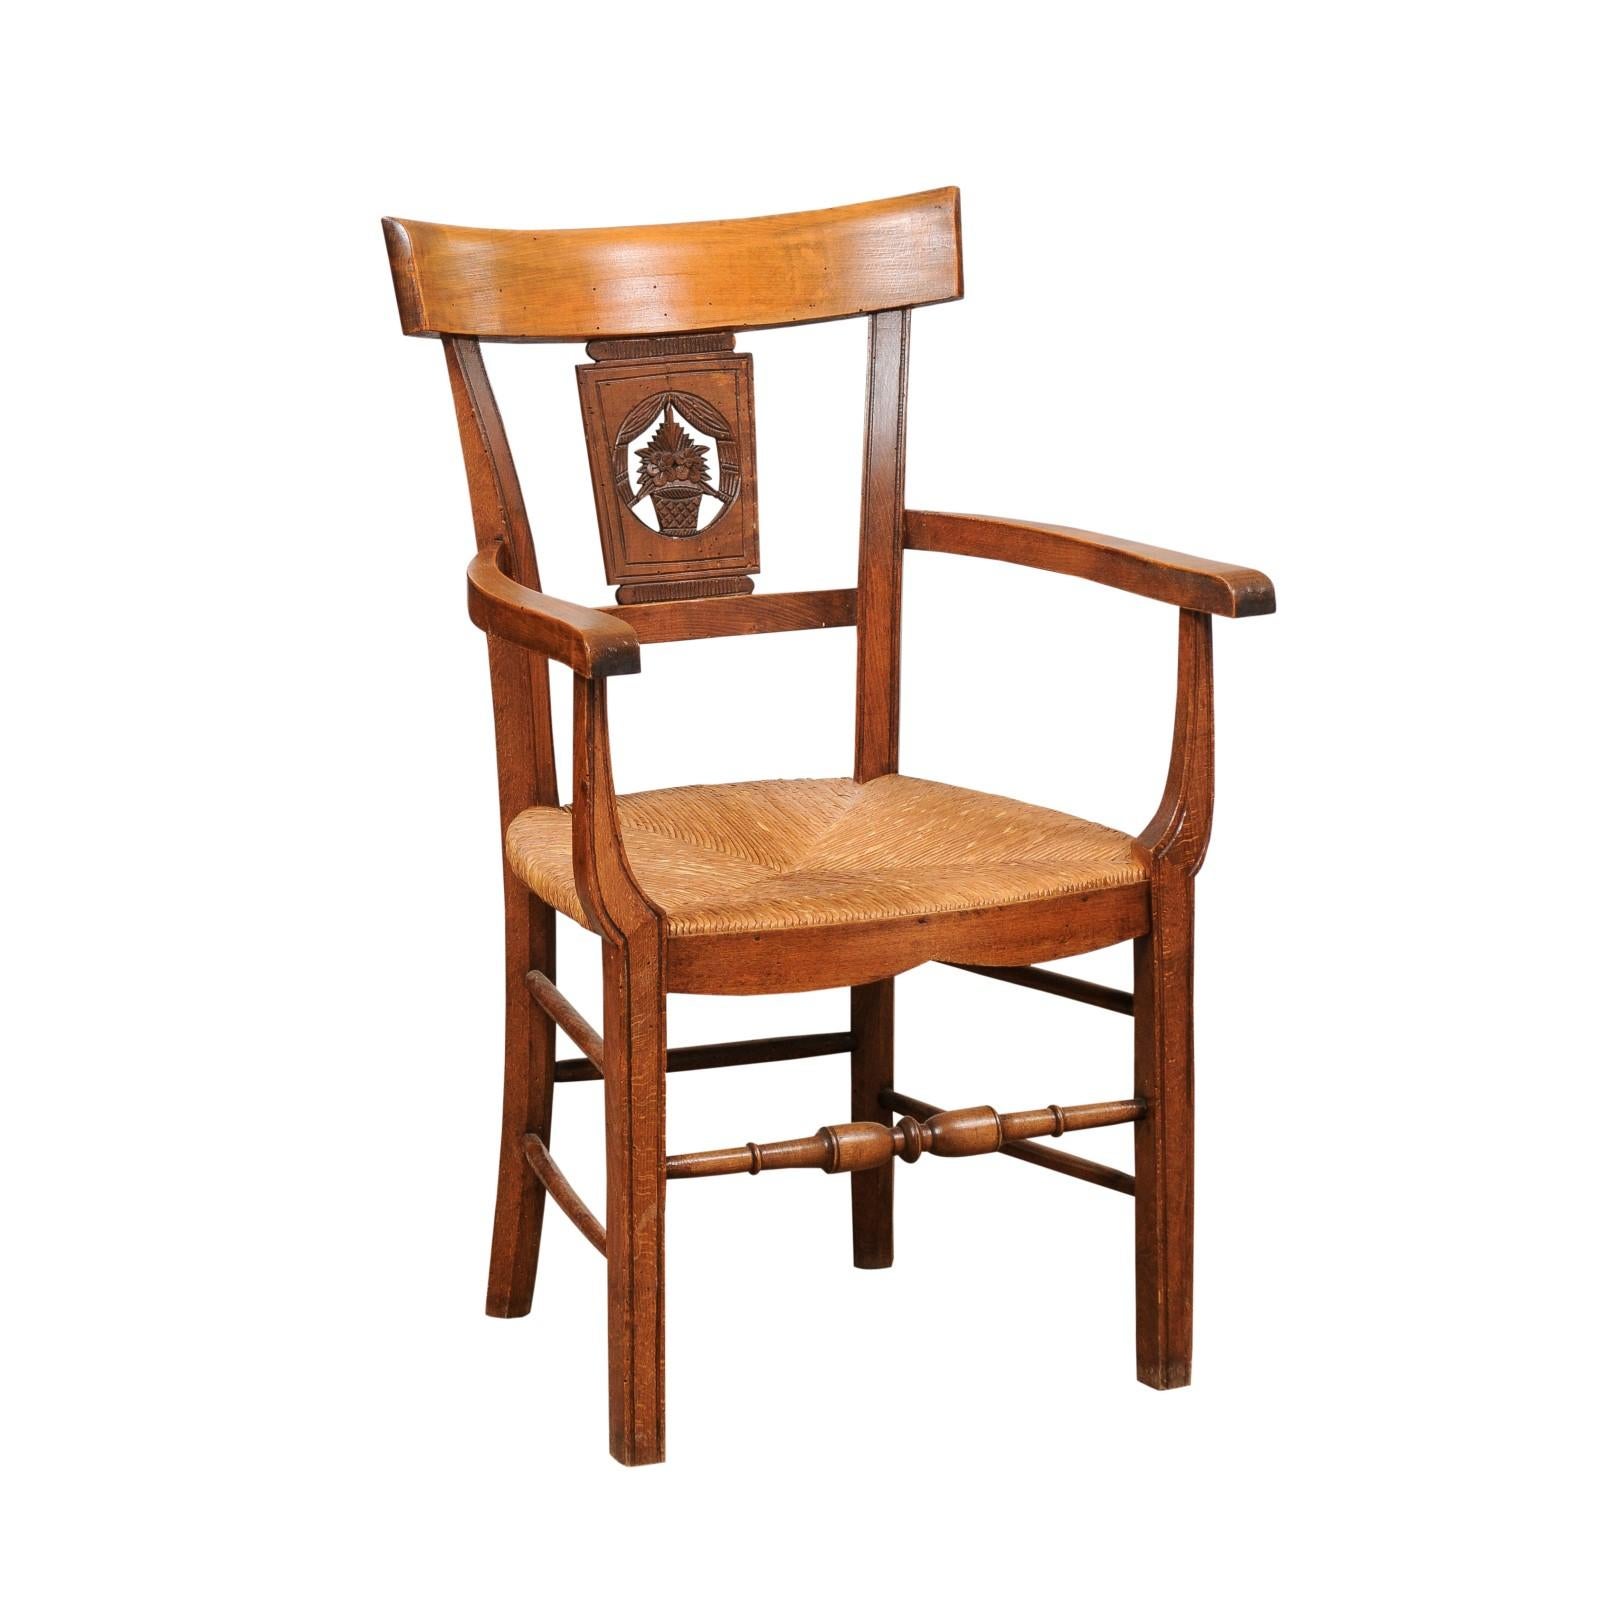 Fruitwood Rush Seat Armchair with Flower Basket Backsplat, Italy ca. 1850 For Sale 3